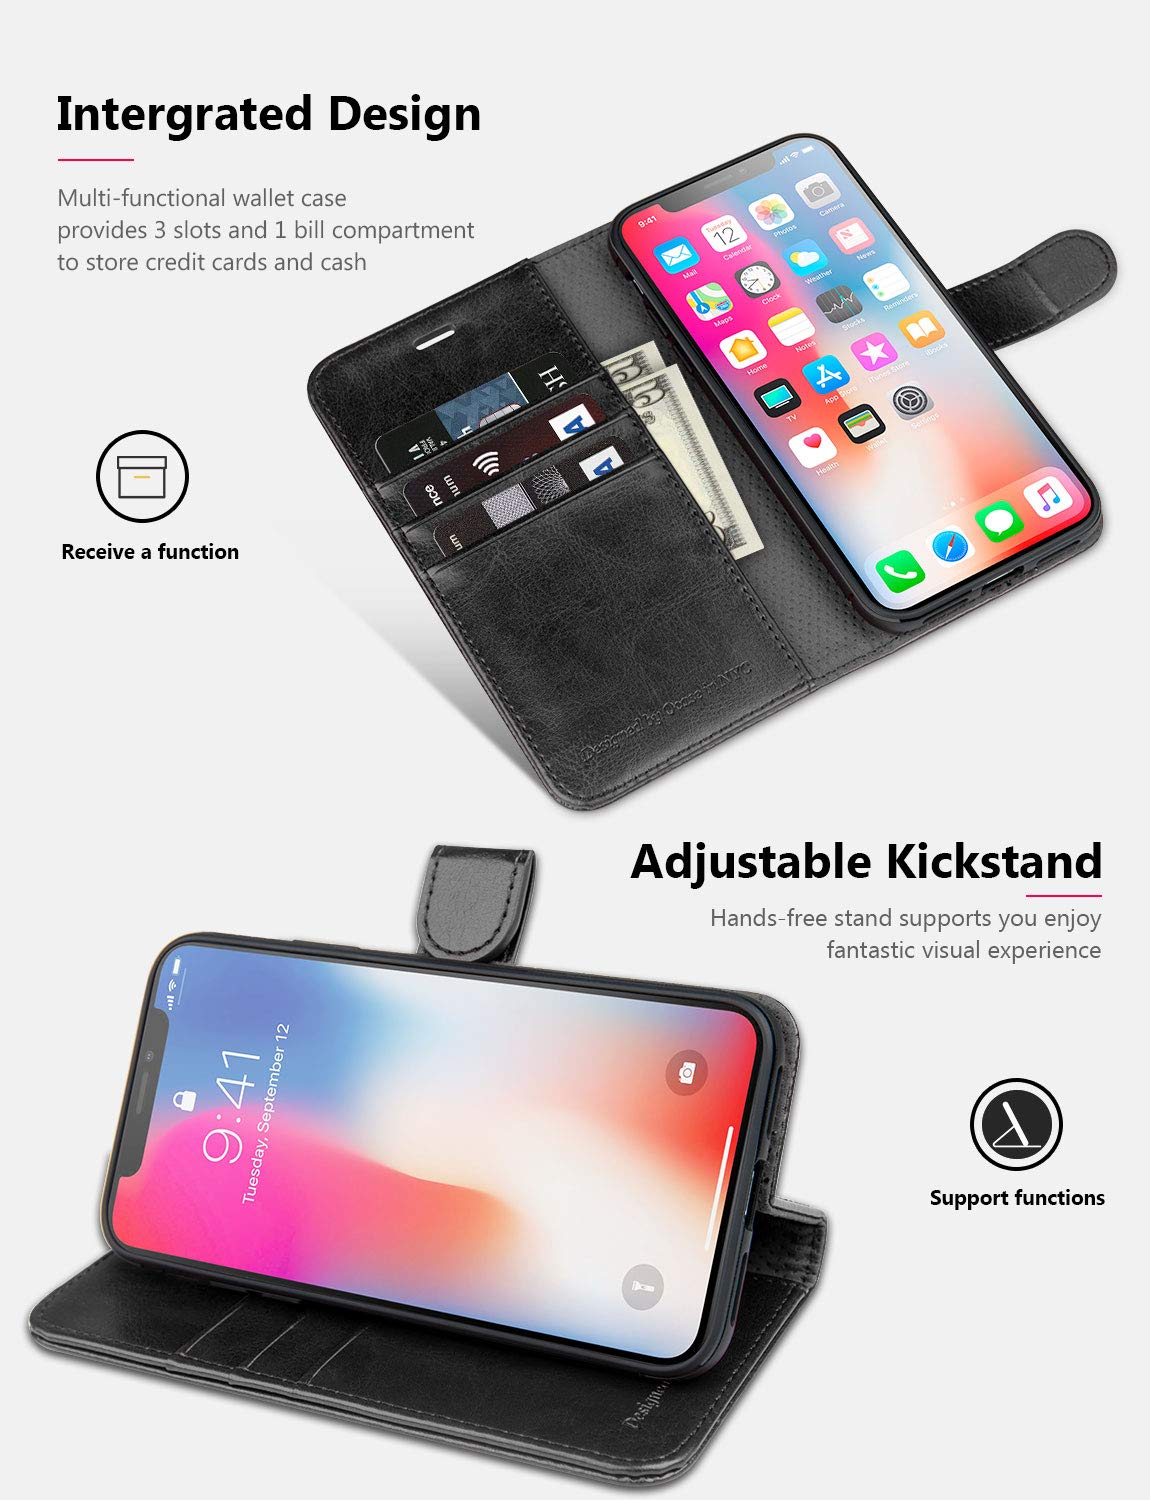 OCASE iPhone X Wallet Case, iPhone 10 Case [ Wireless Charging ] [ Card Slot ] [ Kickstand ] Leather Flip Wallet Phone Cover Compatible with iPhone X/iPhone 10 - Black